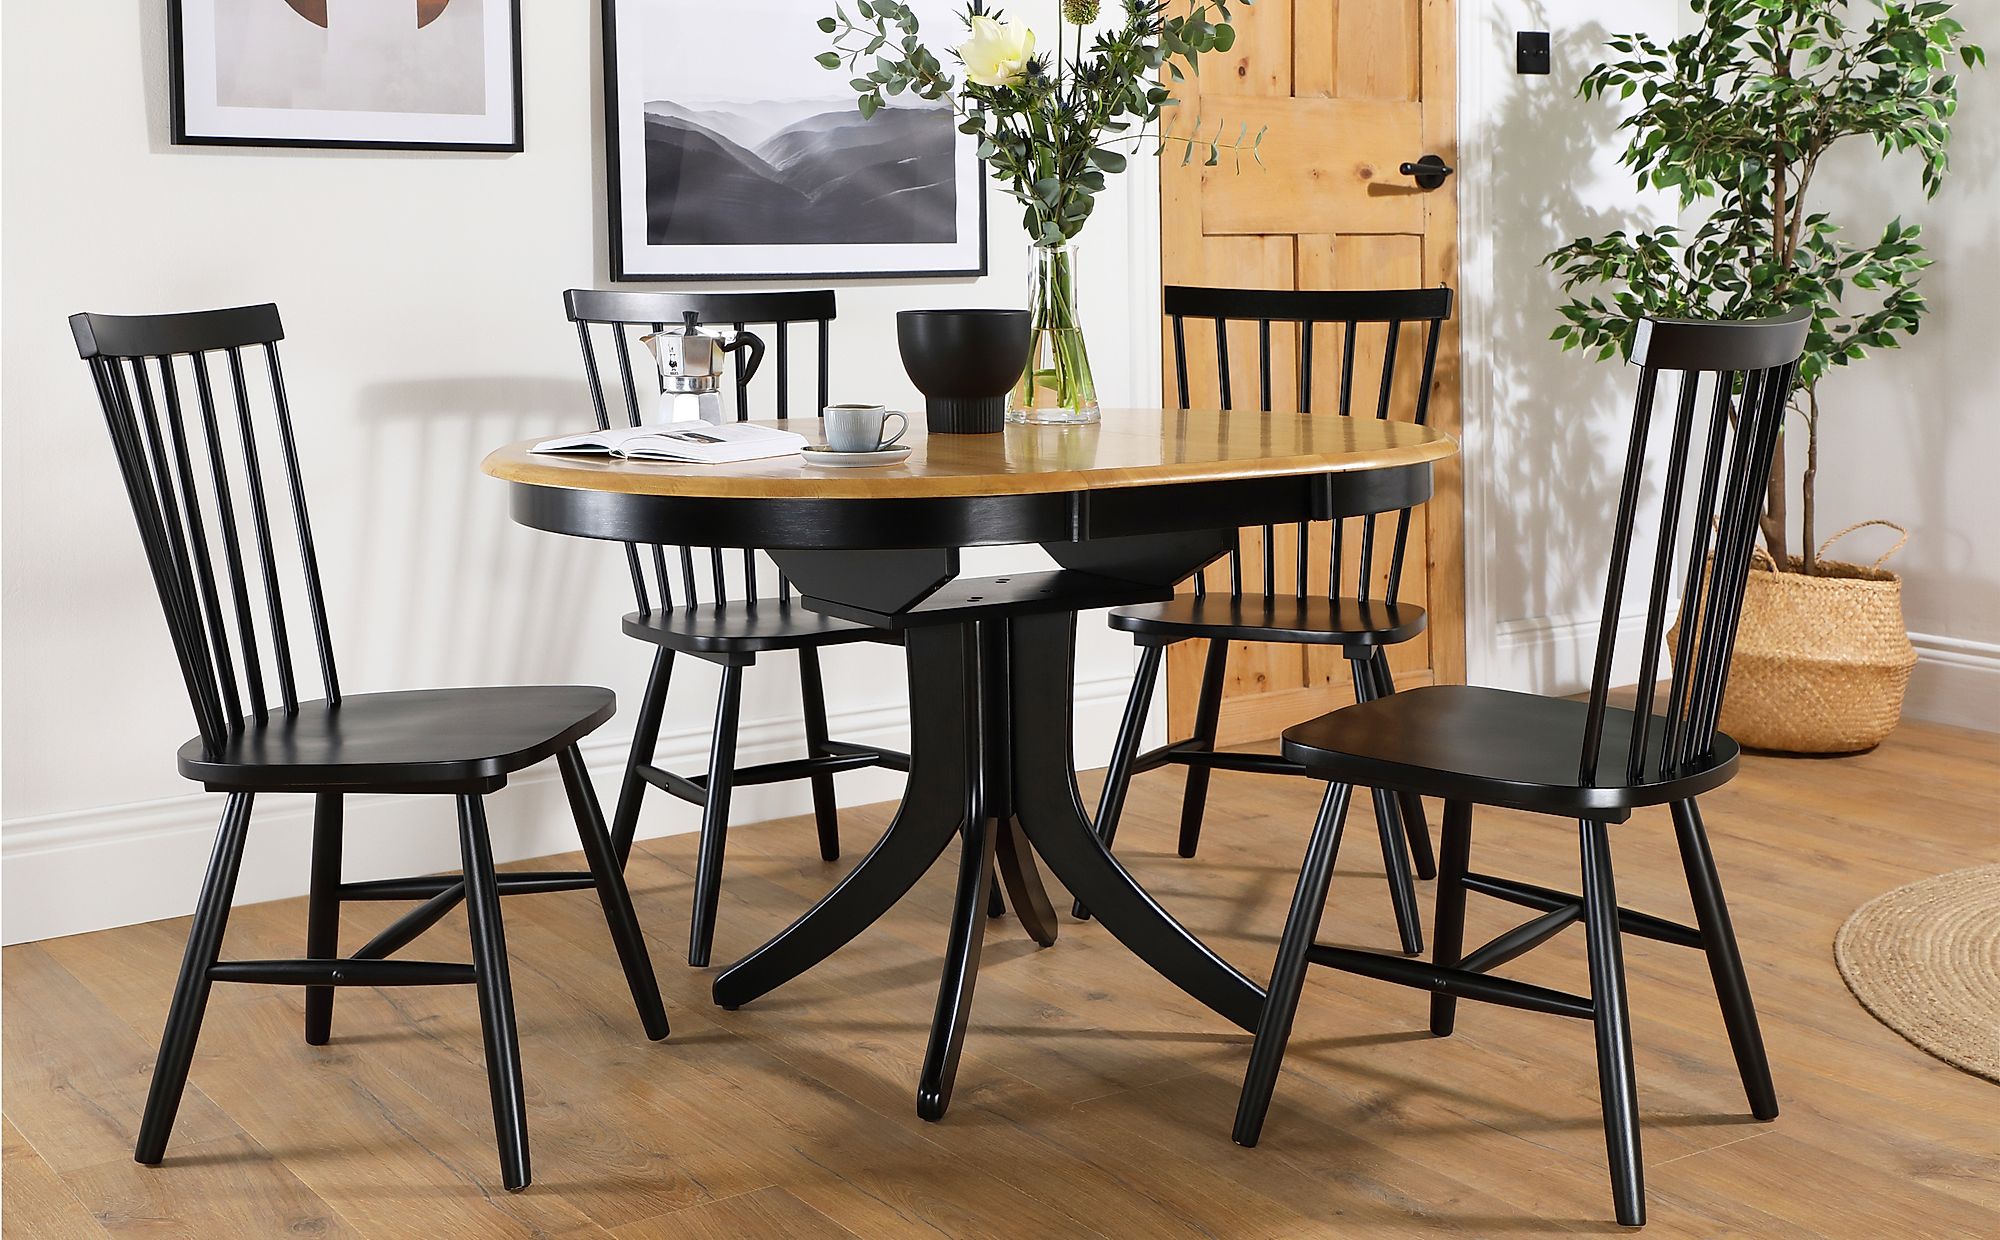 black and wood painted kitchen table chair